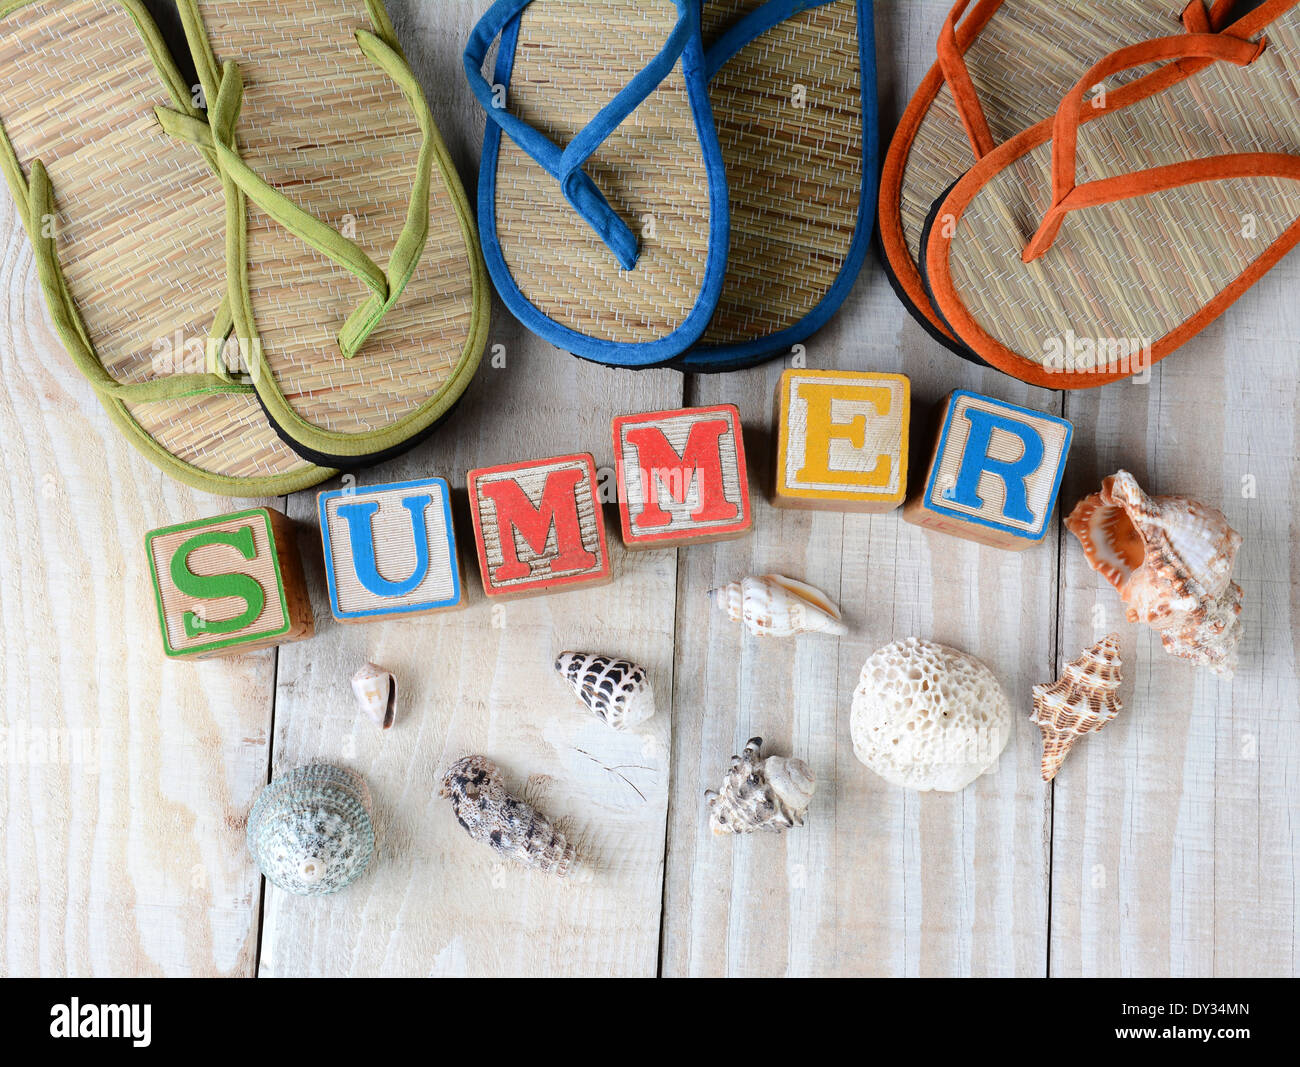 Childrens blocks spelling out Summer on rustic wooden boards The word is surrounded by sea shells, and flip-flop style sandals. Stock Photo